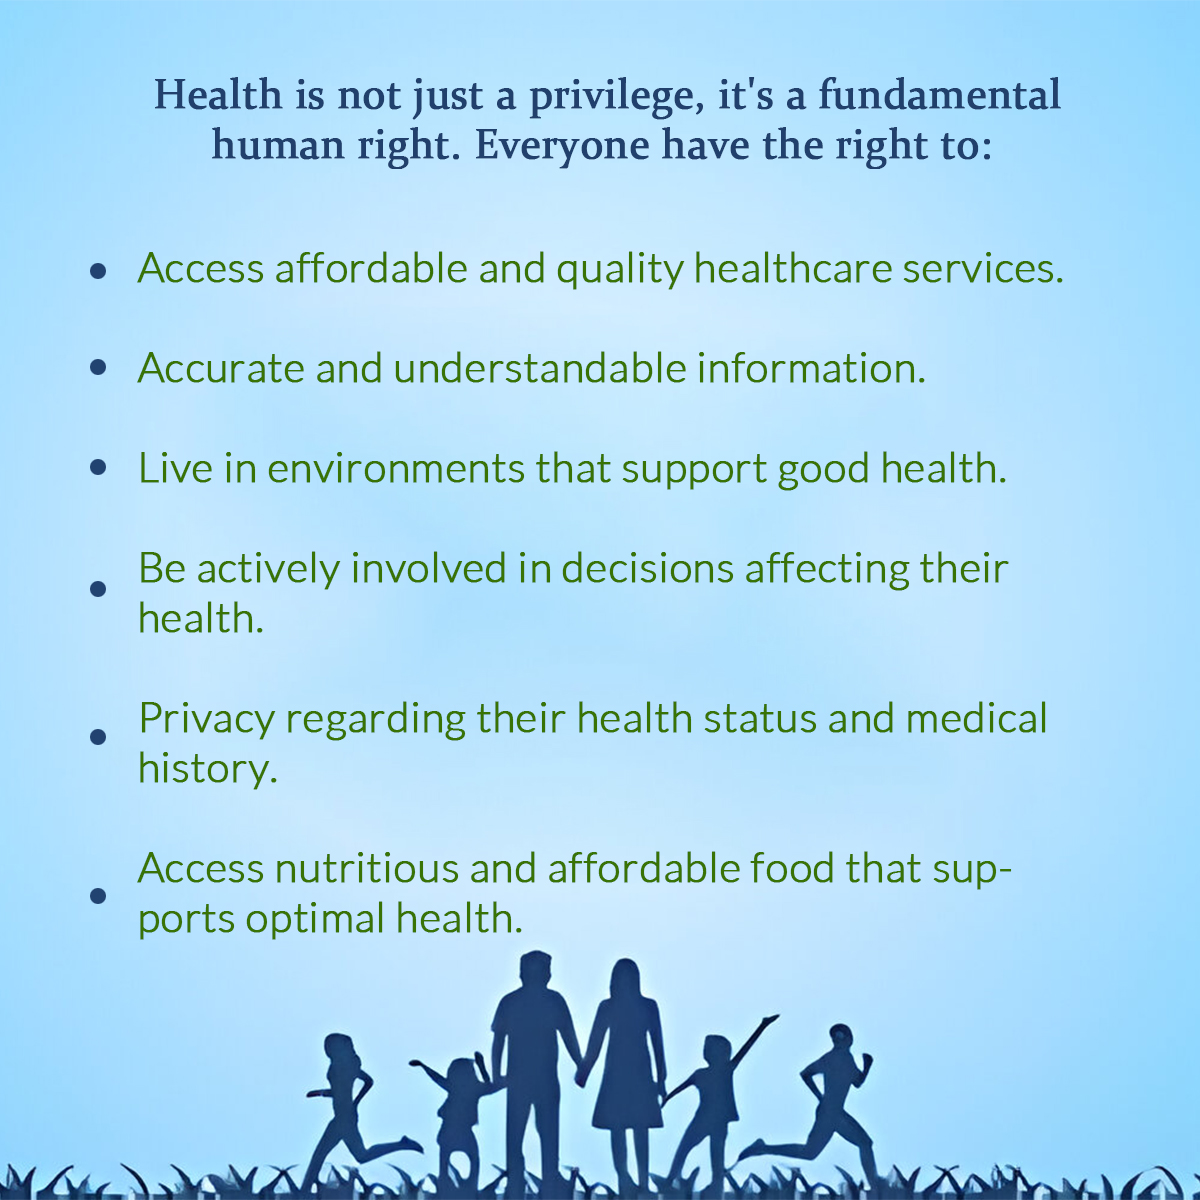 World Health Day is a global reminder to prioritize health equity, access to healthcare, and disease prevention. It's a day to celebrate progress, raise awareness about health challenges, and advocate for universal healthcare coverage to ensure everyone can lead a healthy life.